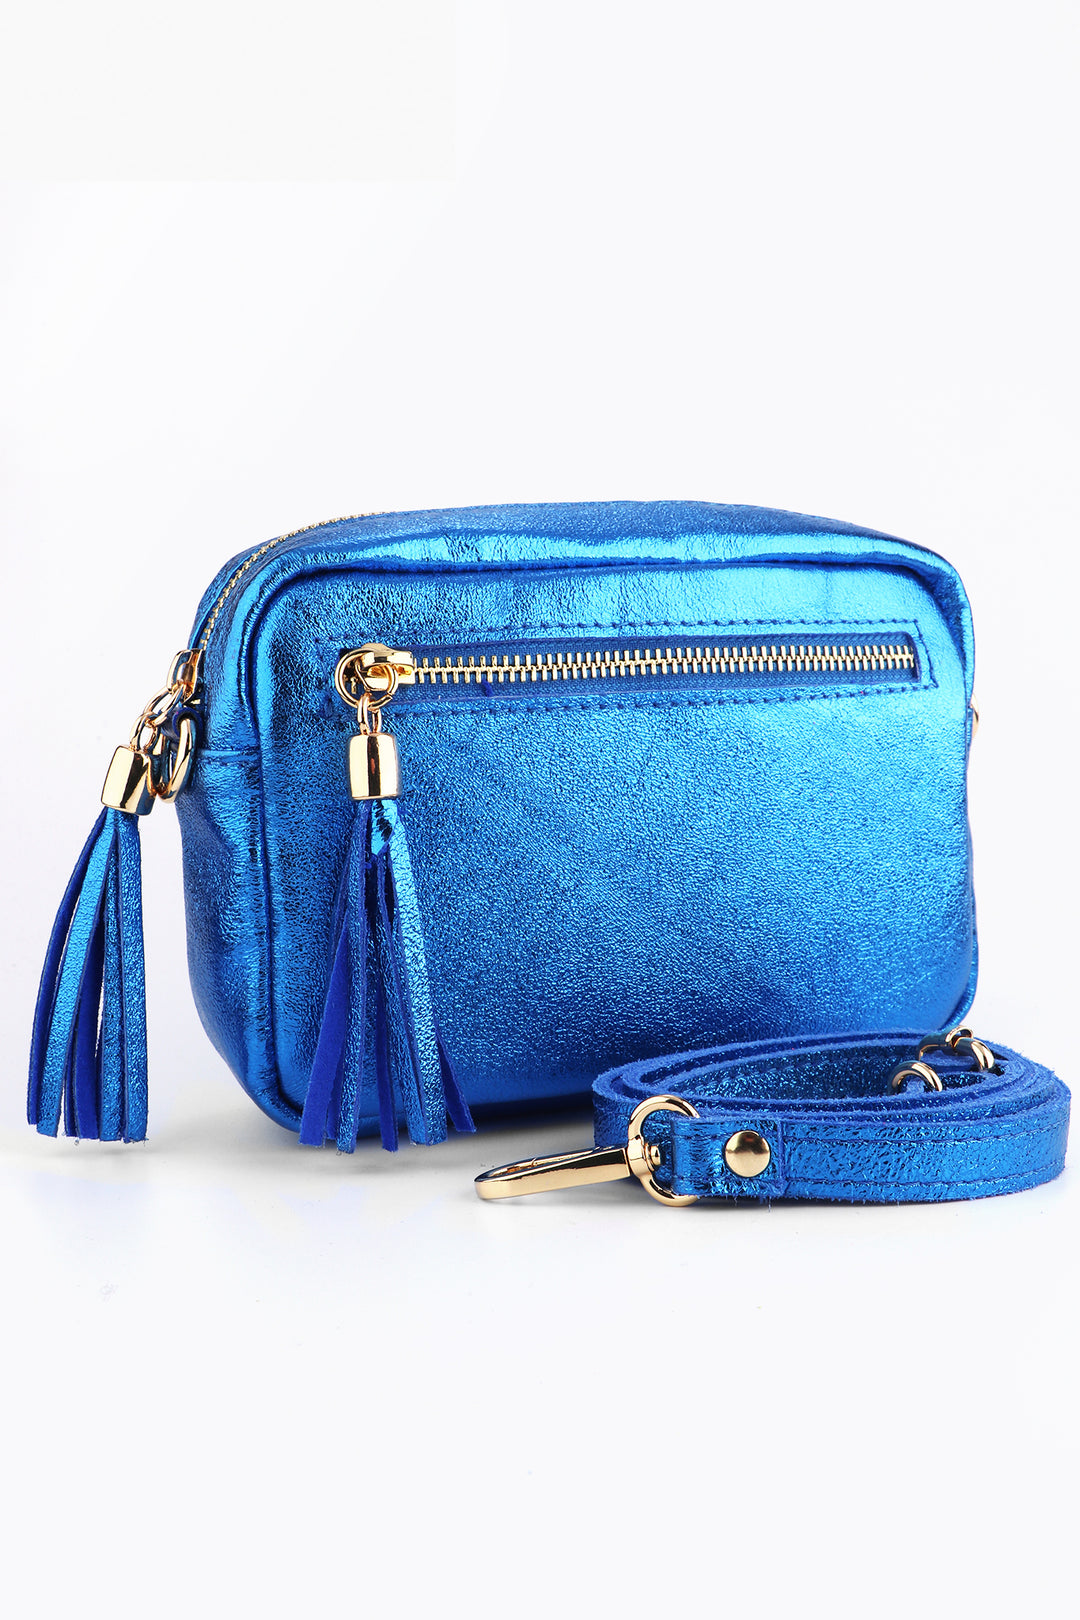 metallic blue small leather cross body camera bag with two zip closing compartments and a detachable shoulder strap